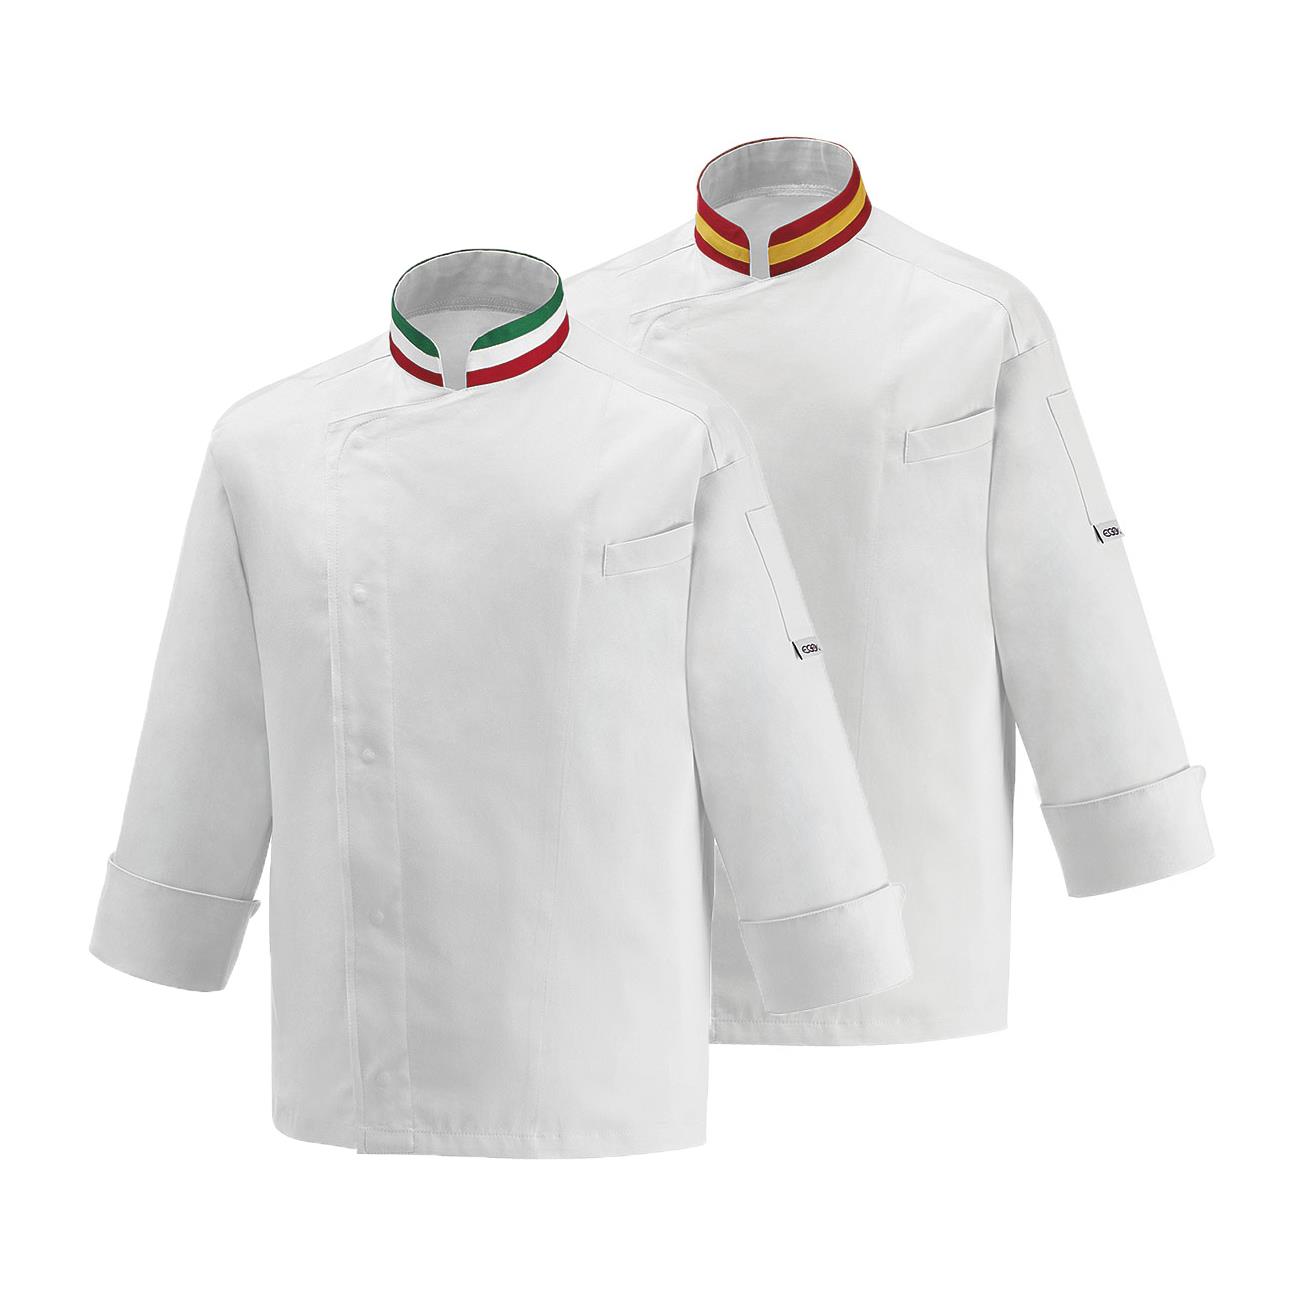 GIACCA CUOCO CHEF EGOCHEF MADE ITALY GREY MIX CHEAP JACKET PASTICCERE PIZZAIOLO 